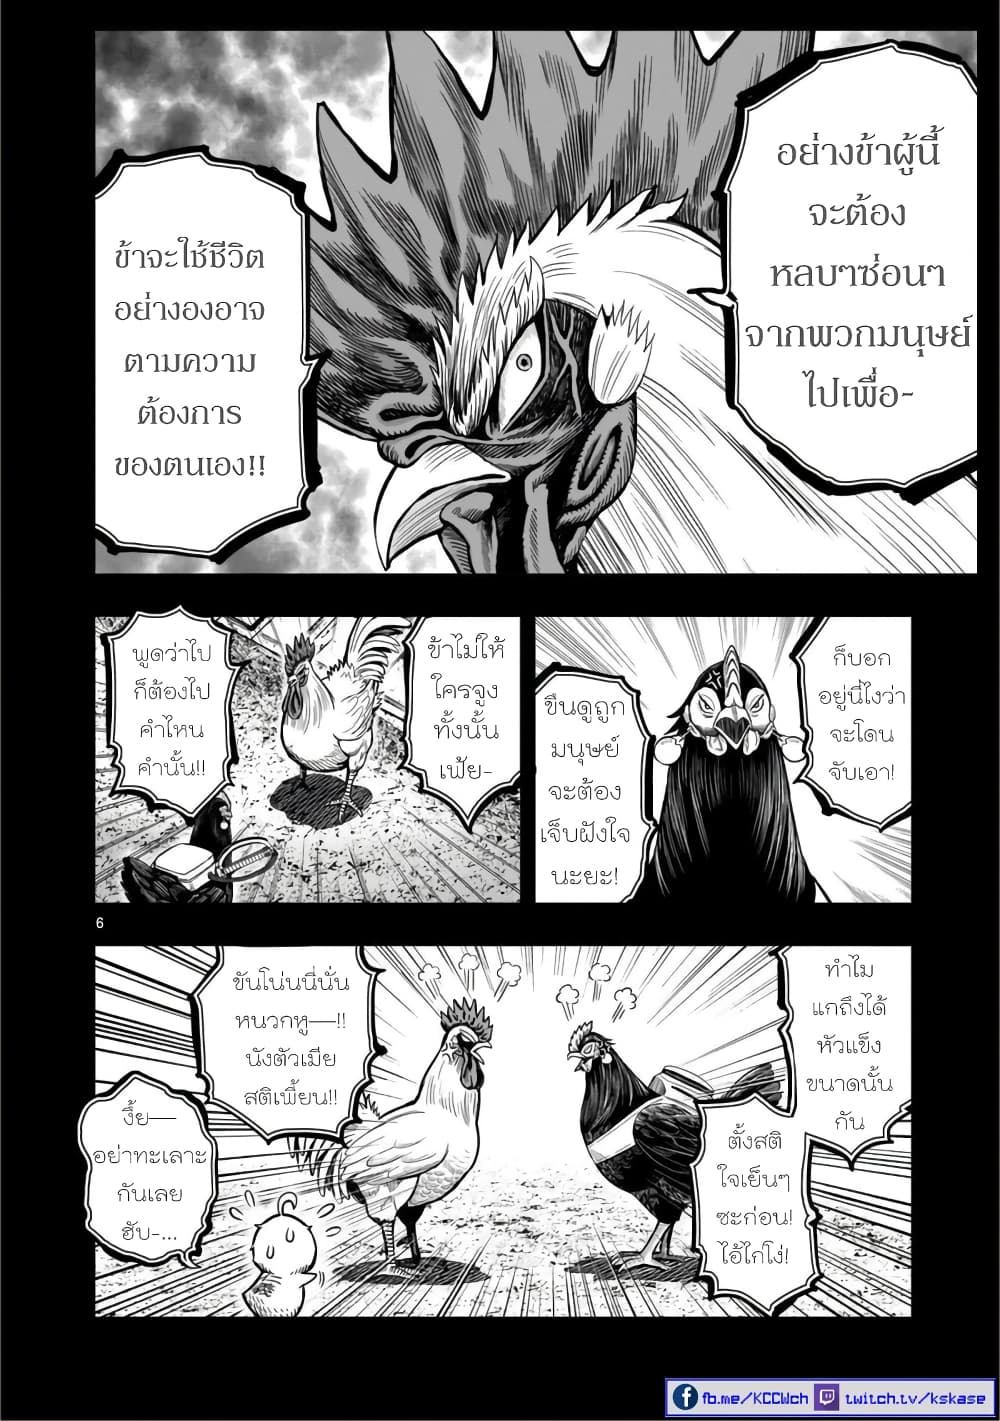 Rooster Fighter 12 (6)